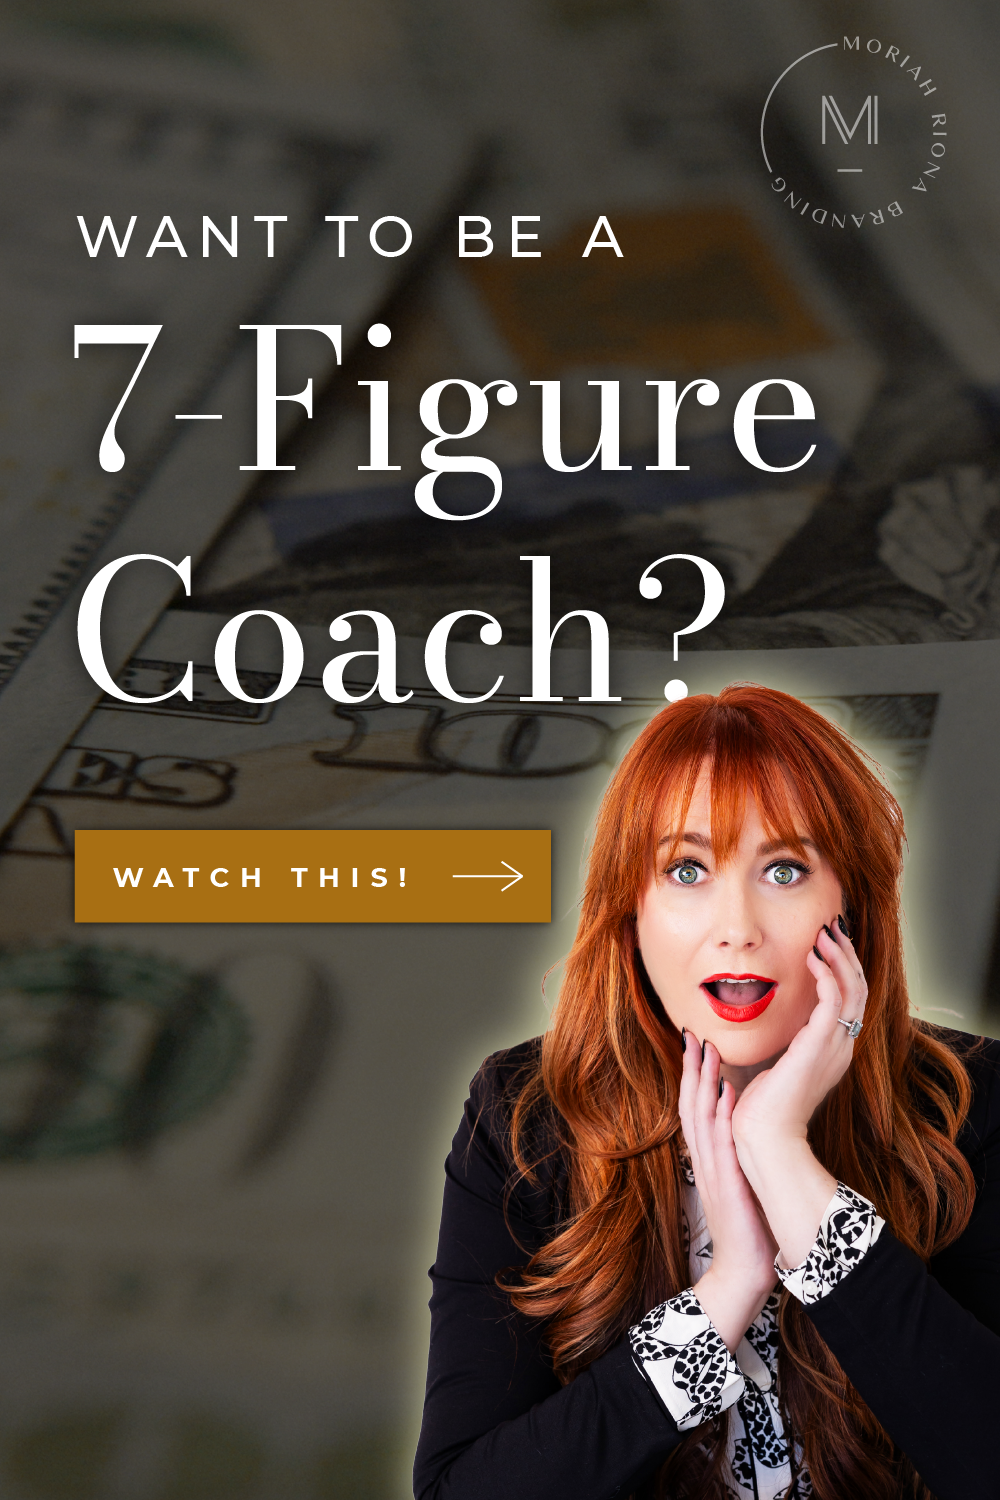 Want to turn your passion into profit and make money online as a coach? This blog post is for you! Learn how to transform your personal brand with my best entrepreneur tips—so you can start building your coaching empire. #luxurybrand #lifecoach #lifecoaching #entrepreneurtips